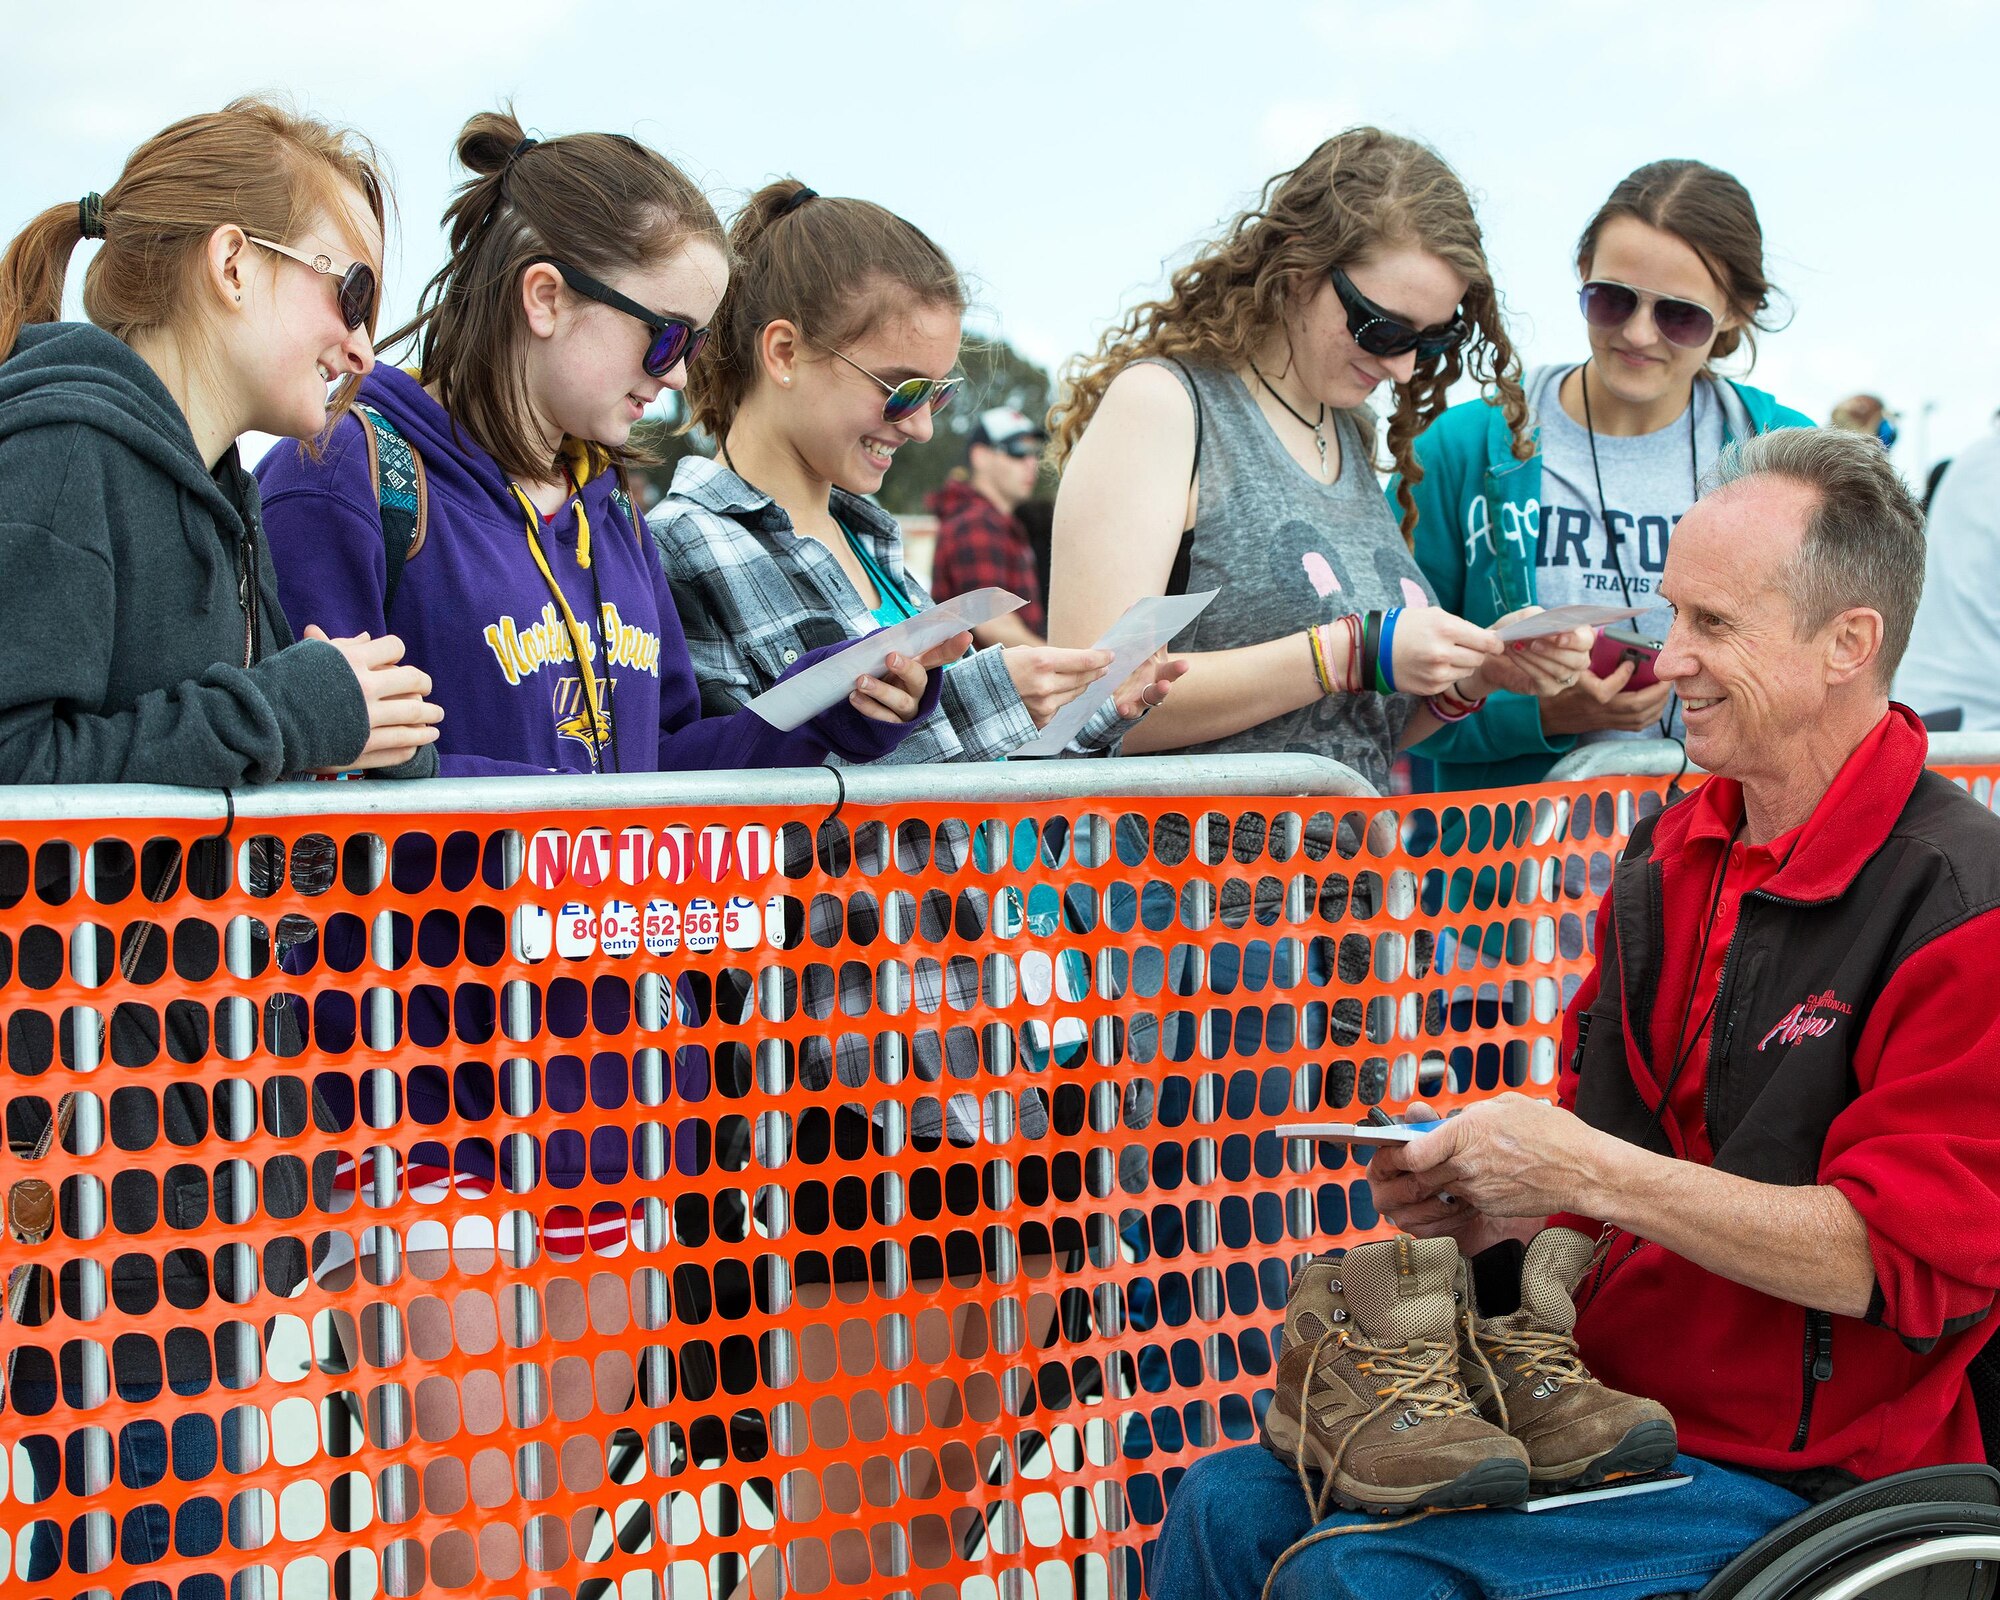 Hang glider Dan Buchanan, a performer in the Wings Over Solano Air Show at Travis Air Force Base, Calif., signs autographs for fans May 6, 2017. Buchanan lost the ability to walk during an accident years ago but, despite his handicap, still loves performing in front of thousands of people. (U.S. Air Force photo by Louis Briscese)